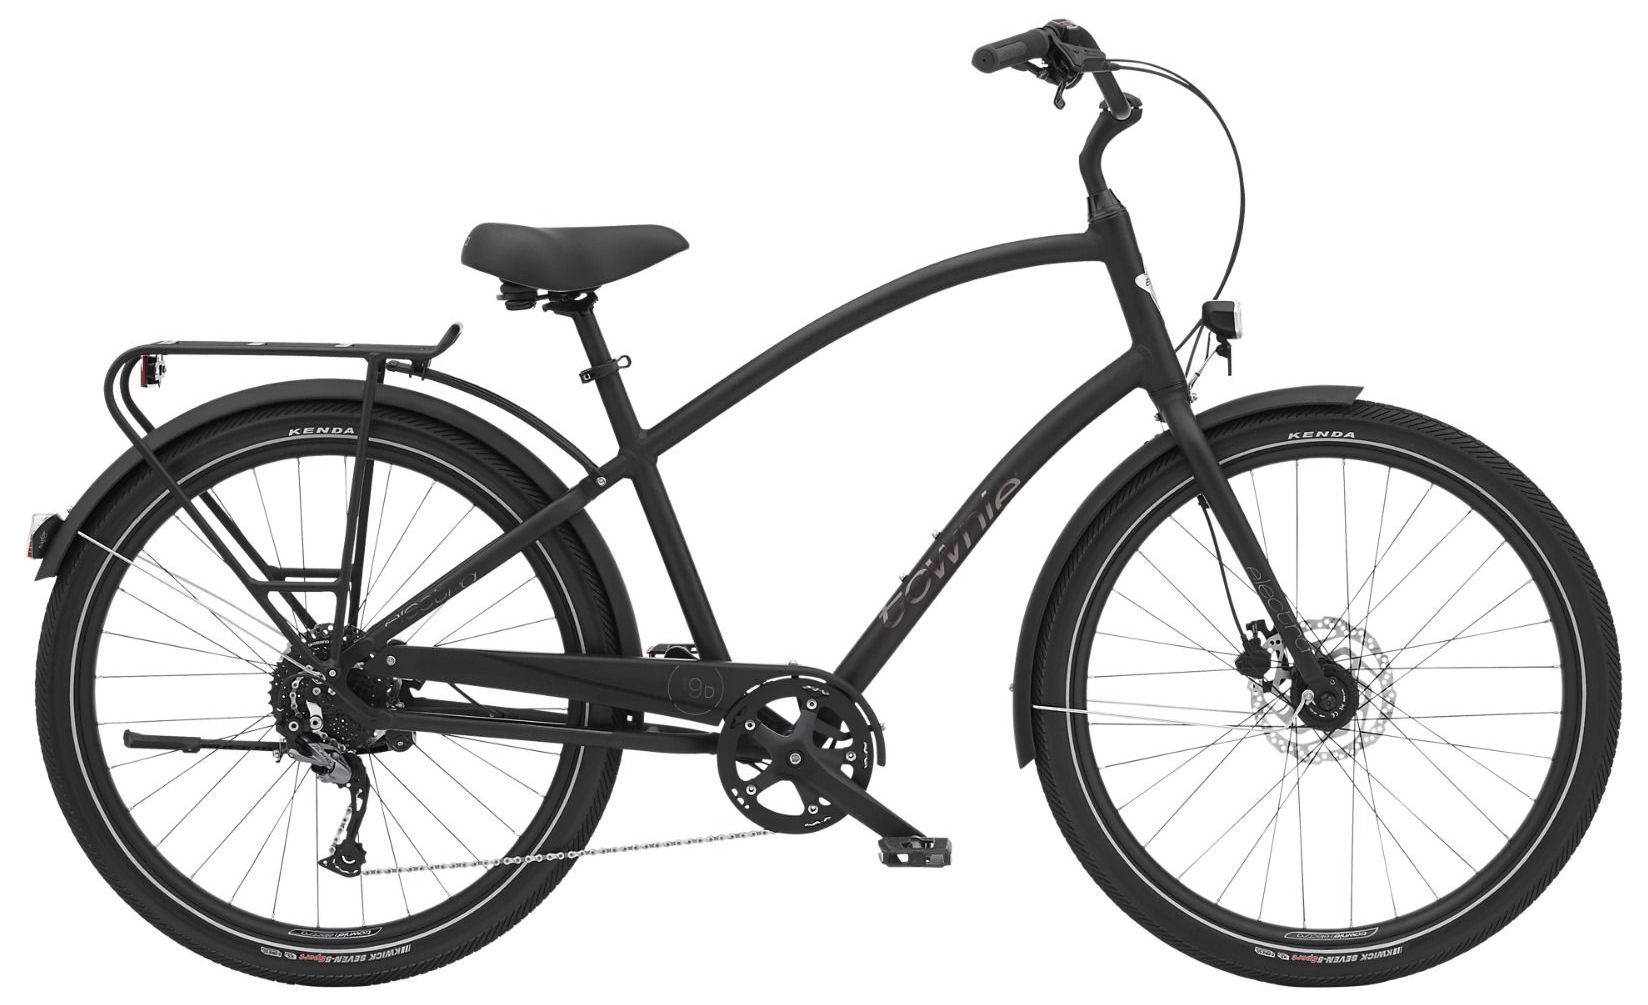  Велосипед Electra Townie Path 9D EQ Step Over (2021) 2021